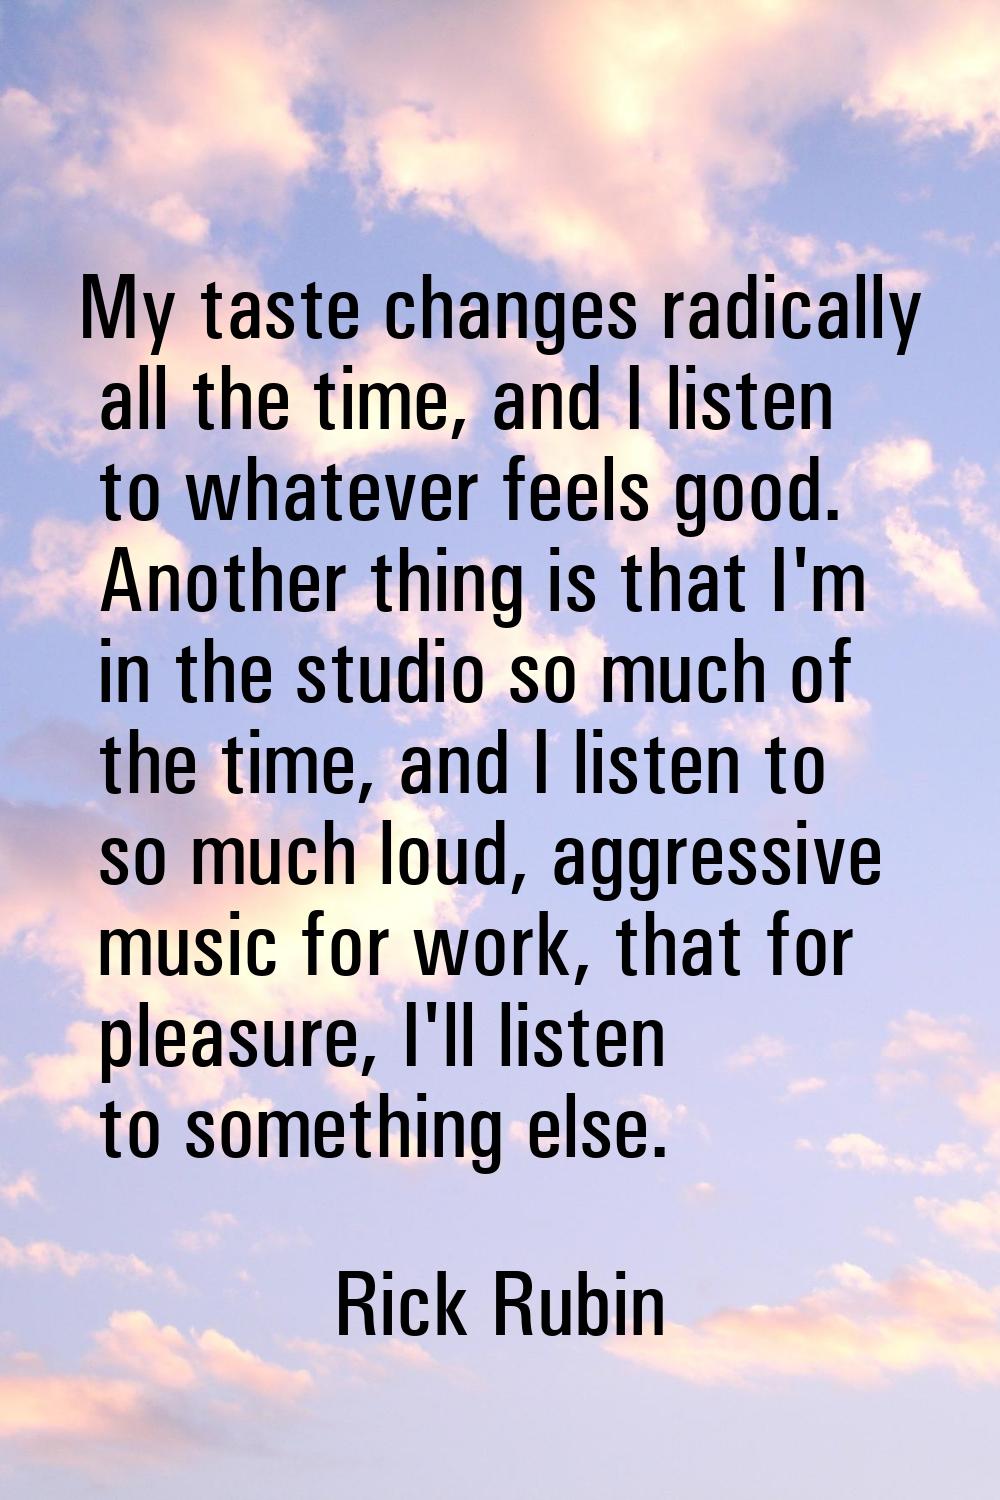 My taste changes radically all the time, and I listen to whatever feels good. Another thing is that